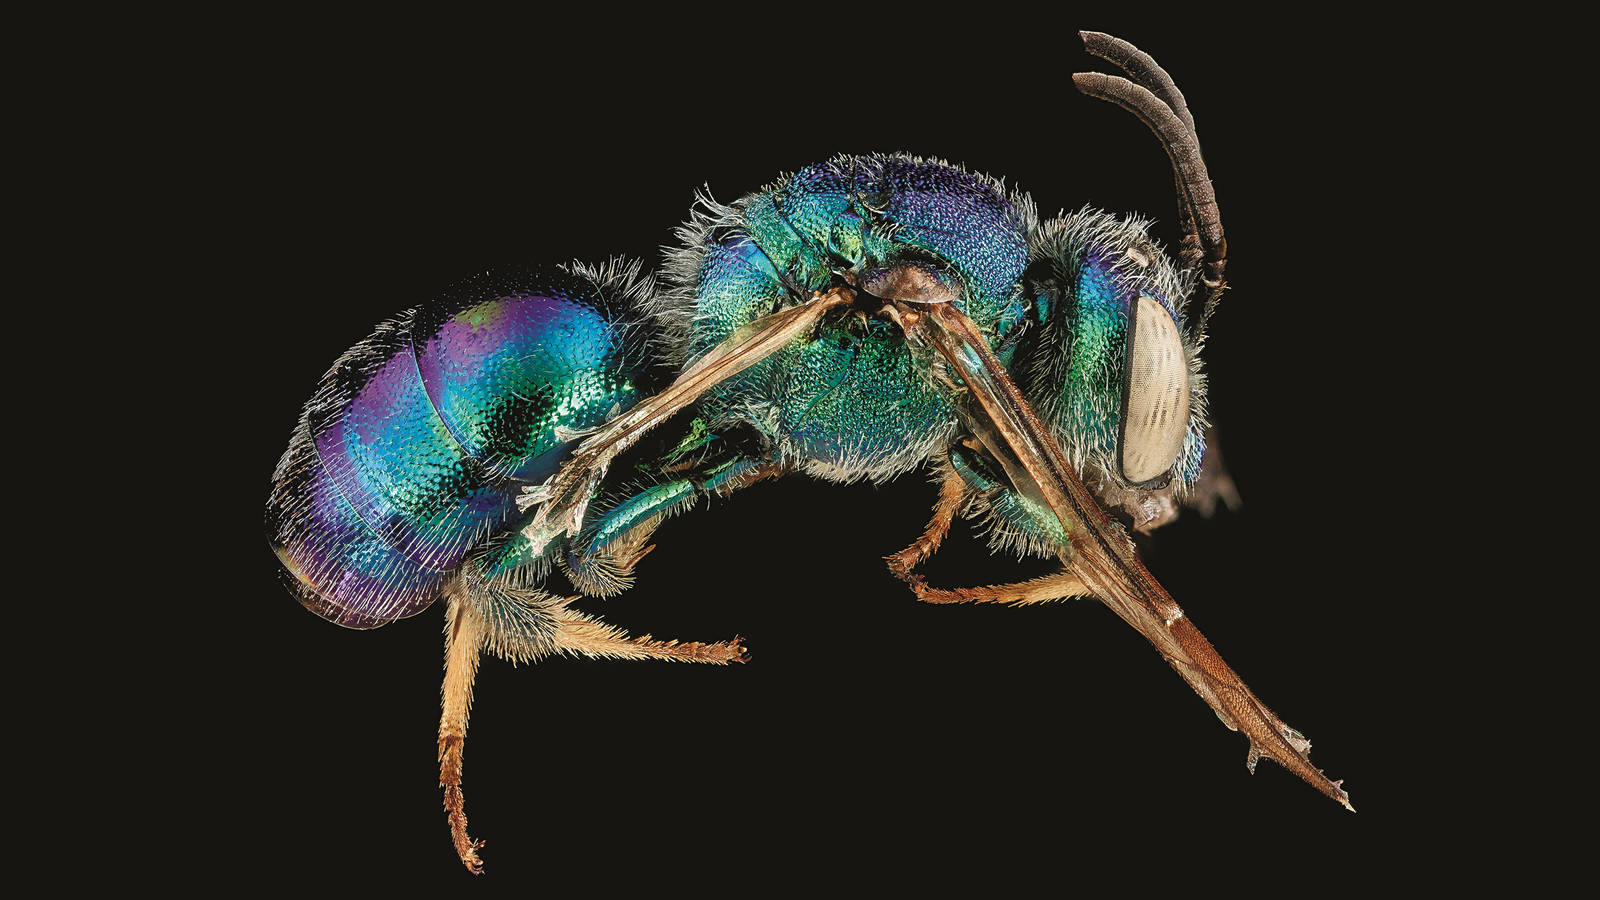 <h3 style="text-align: center; padding: 50px;"><span class="text-Intro-style"><em>Augochloropsis anonyma</em> (bee), Biscayne National Park, Florida. © SAM DROEGE/USGS BEE INVENTORY AND MONITORING LAB</span></h3>